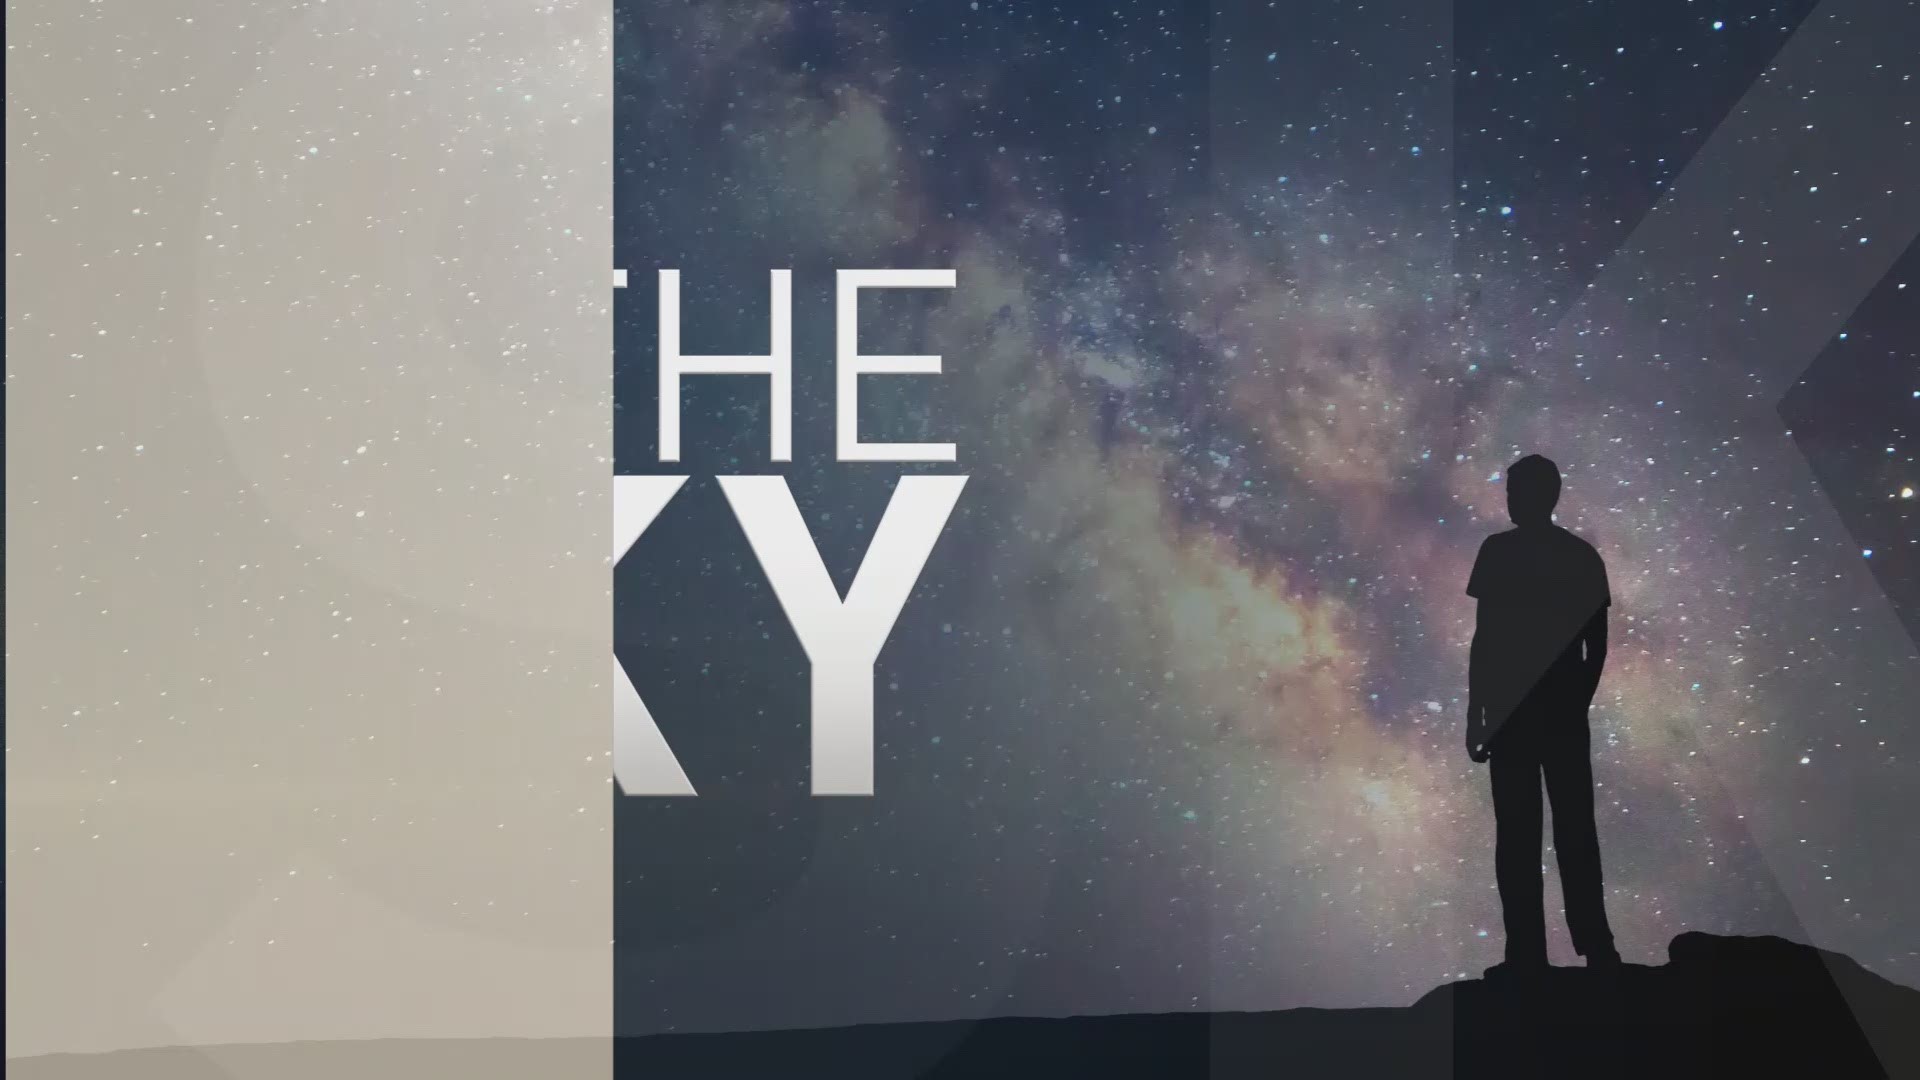 WATCH | We share some awesome pictures & say farewell to Comet Neowise in this edition of "In the Sky."